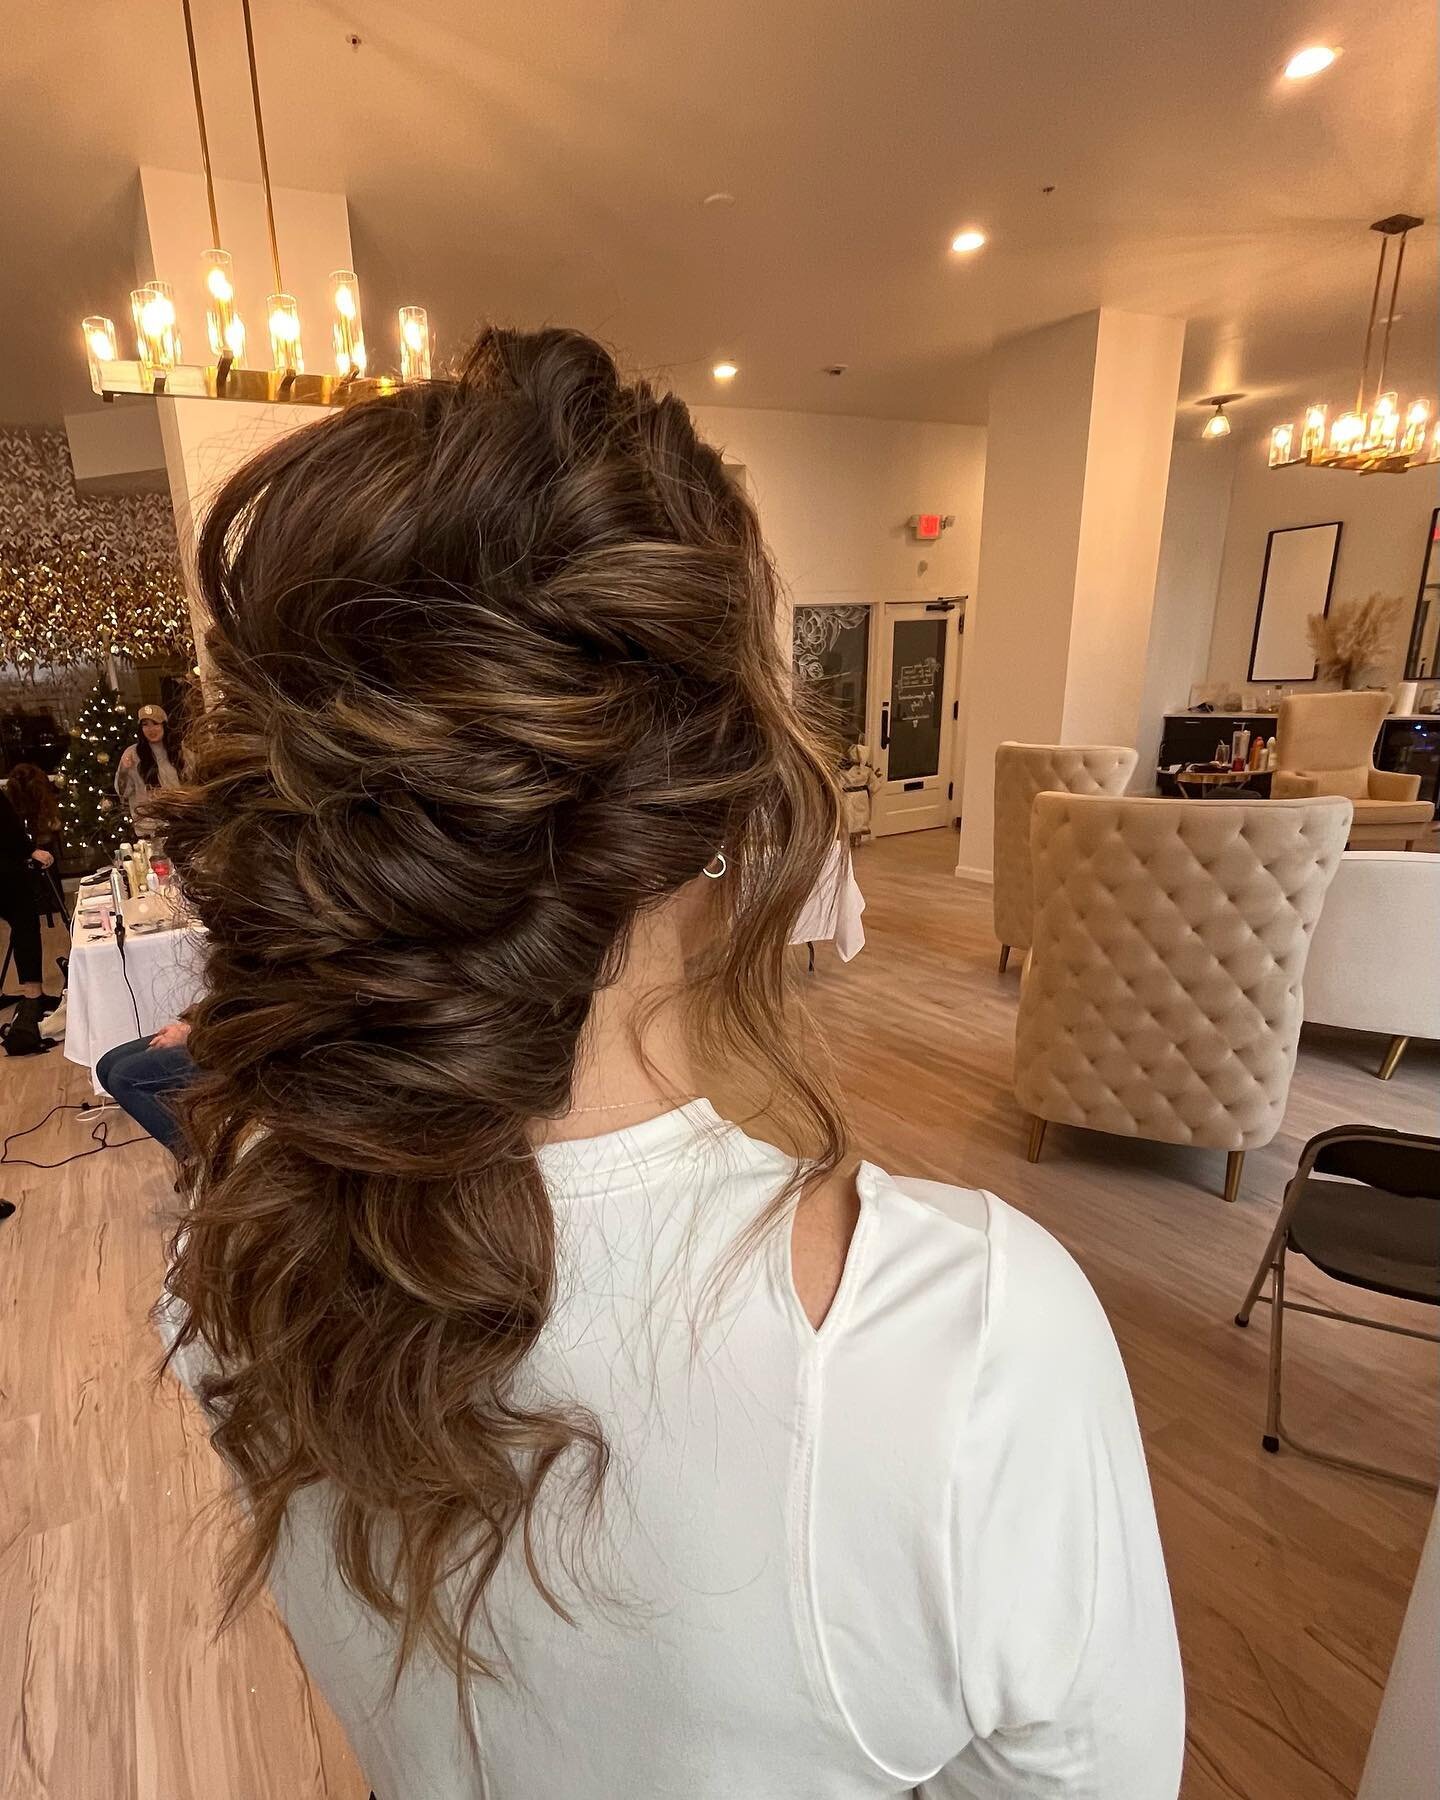 The perfect bridal style for someone who wants to wear their hair down with a little more structure✨ 

#mnbride #weddinghairstyles #weddinghairinspiration #bridalhair #bridetobe #bohobride #bohohair 
#weddinghair #travelingstylist